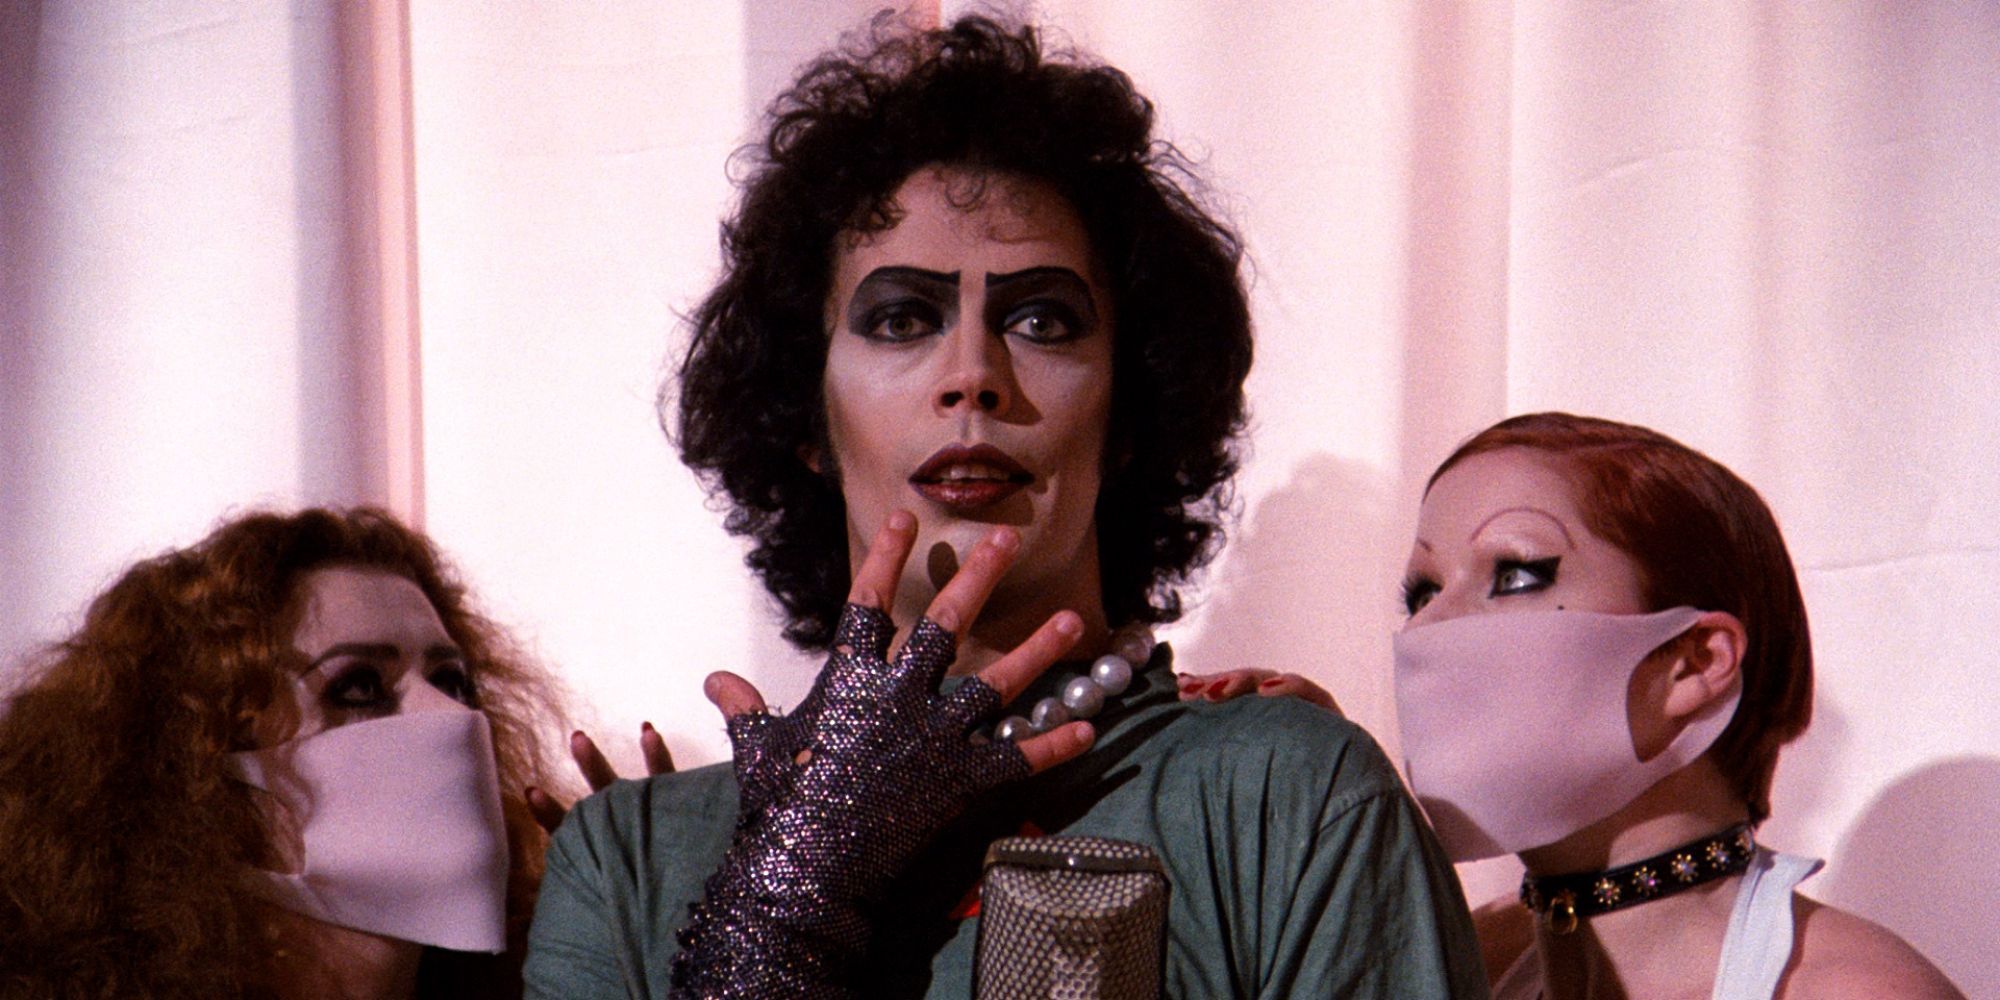 Tim Curry as Frank-N-Furter in The Rocky Horror Picture Show